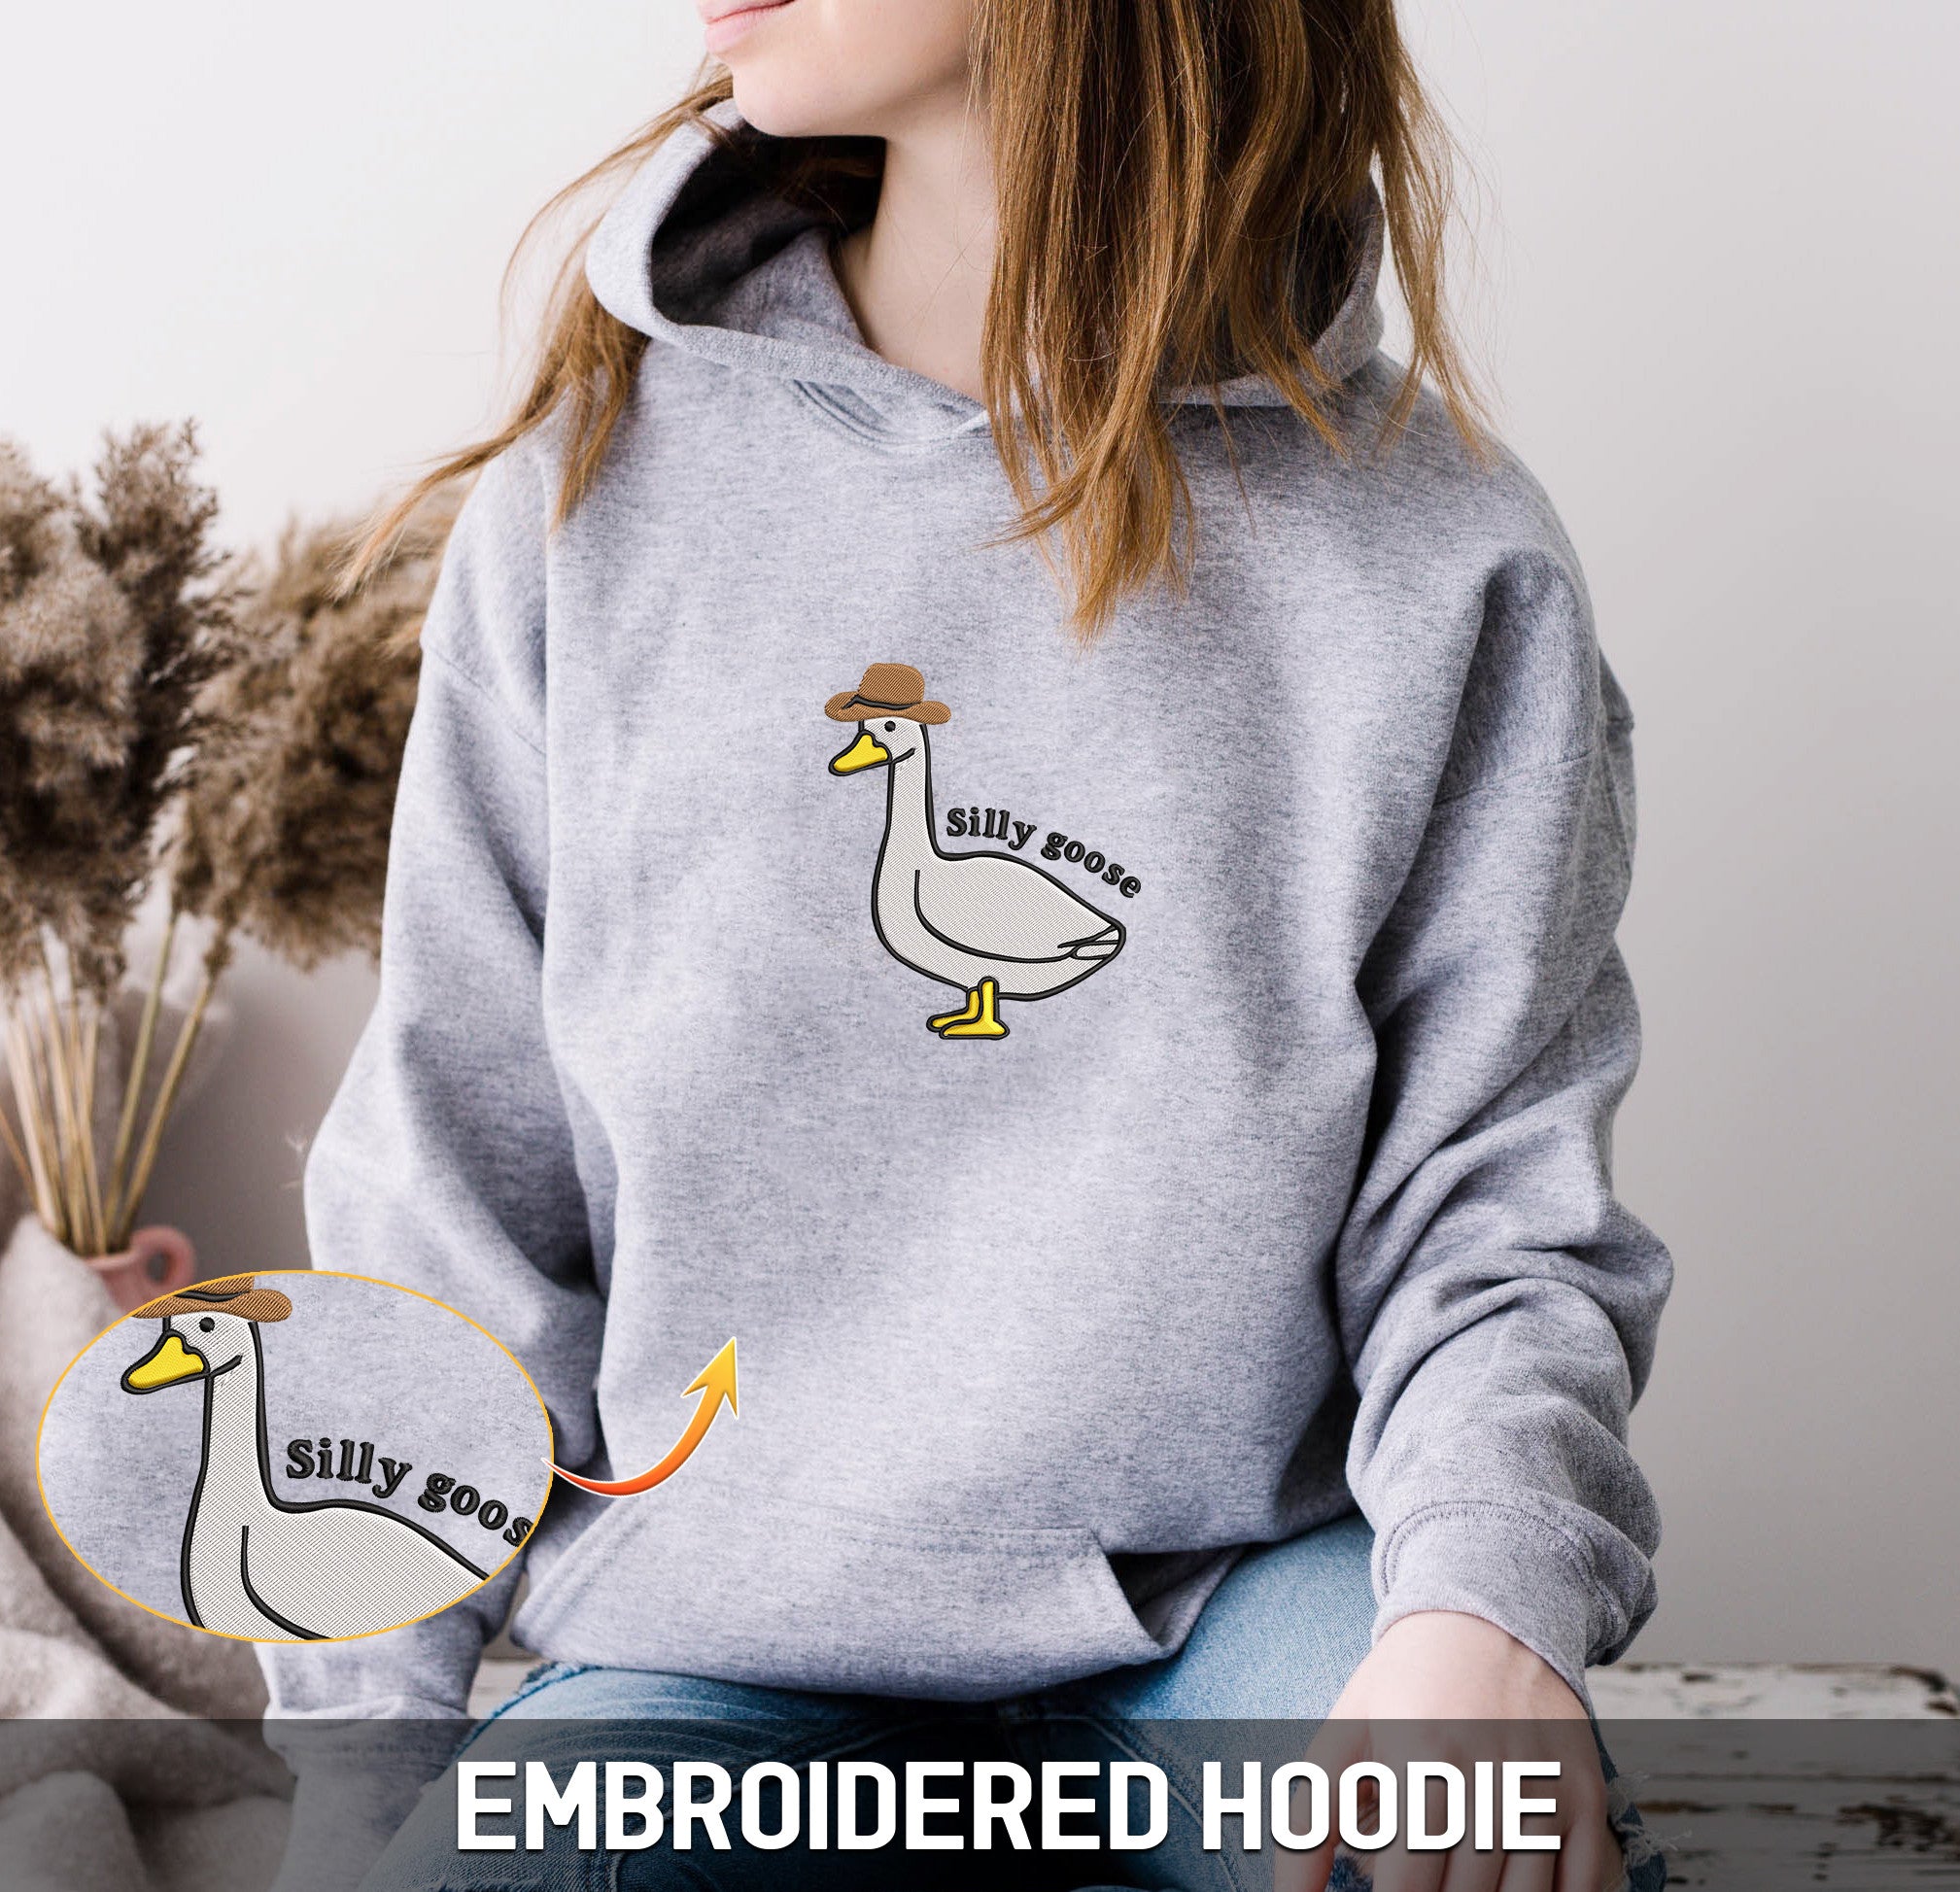 Embroidered Silly Goose Sweatshirt, Silly Goose Shirt, Funny Sweatshirt, Funny Embroidered Shirt